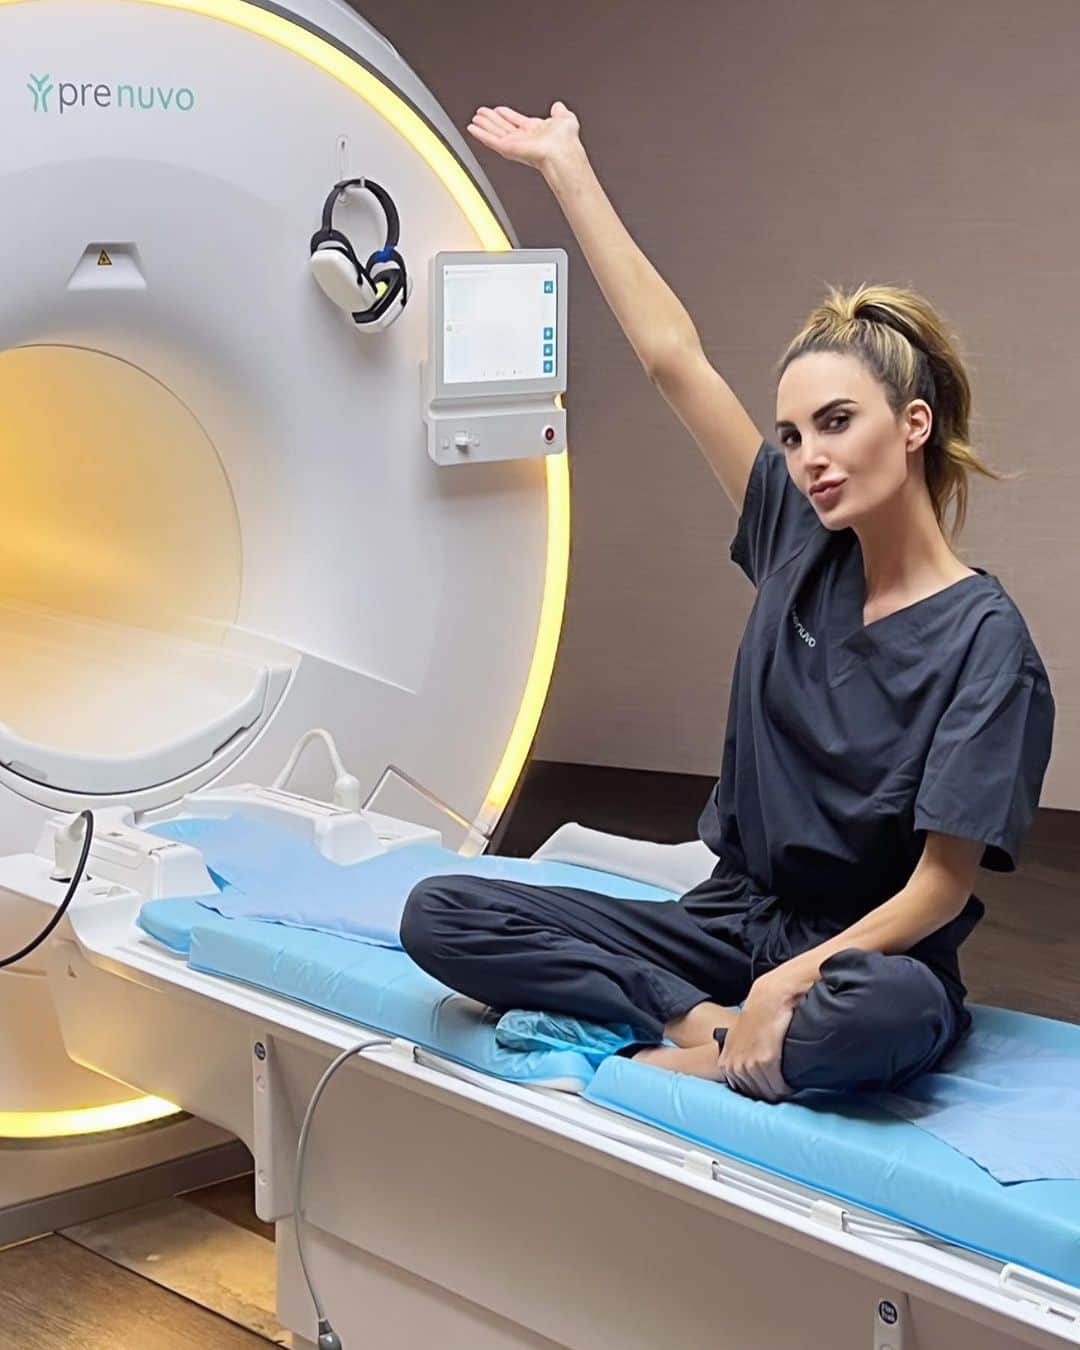 Elizabeth Chambers Hammerのインスタグラム：「@prenuvo for peace of mind. When it comes to health, I want answers and I’ll always do the deep dive. Prenuvo uses advanced MRI to perform a full body scan to detect solid cancerous tumors at stage 1 and around 500 other conditions (including aneurysms, spine herniations, fatty liver disease). The process doesn’t use radiation or contrast and gives potentially life-saving insights to 1/20 people—AND many of these findings occur in asymptomatic patients. I’ve recommended this to so many friends as gifts to themselves and to loved ones and I’ve been obsessed with Prenuvo for over a year and a half (more on that in stories). Love you guys and want us all to be healthy, informed, and here for a very long time. Sched now and make you, your family, and your health a priority❤️ promo code in bio, stories and here—www.prenuvo.com/ELIZABETH.」